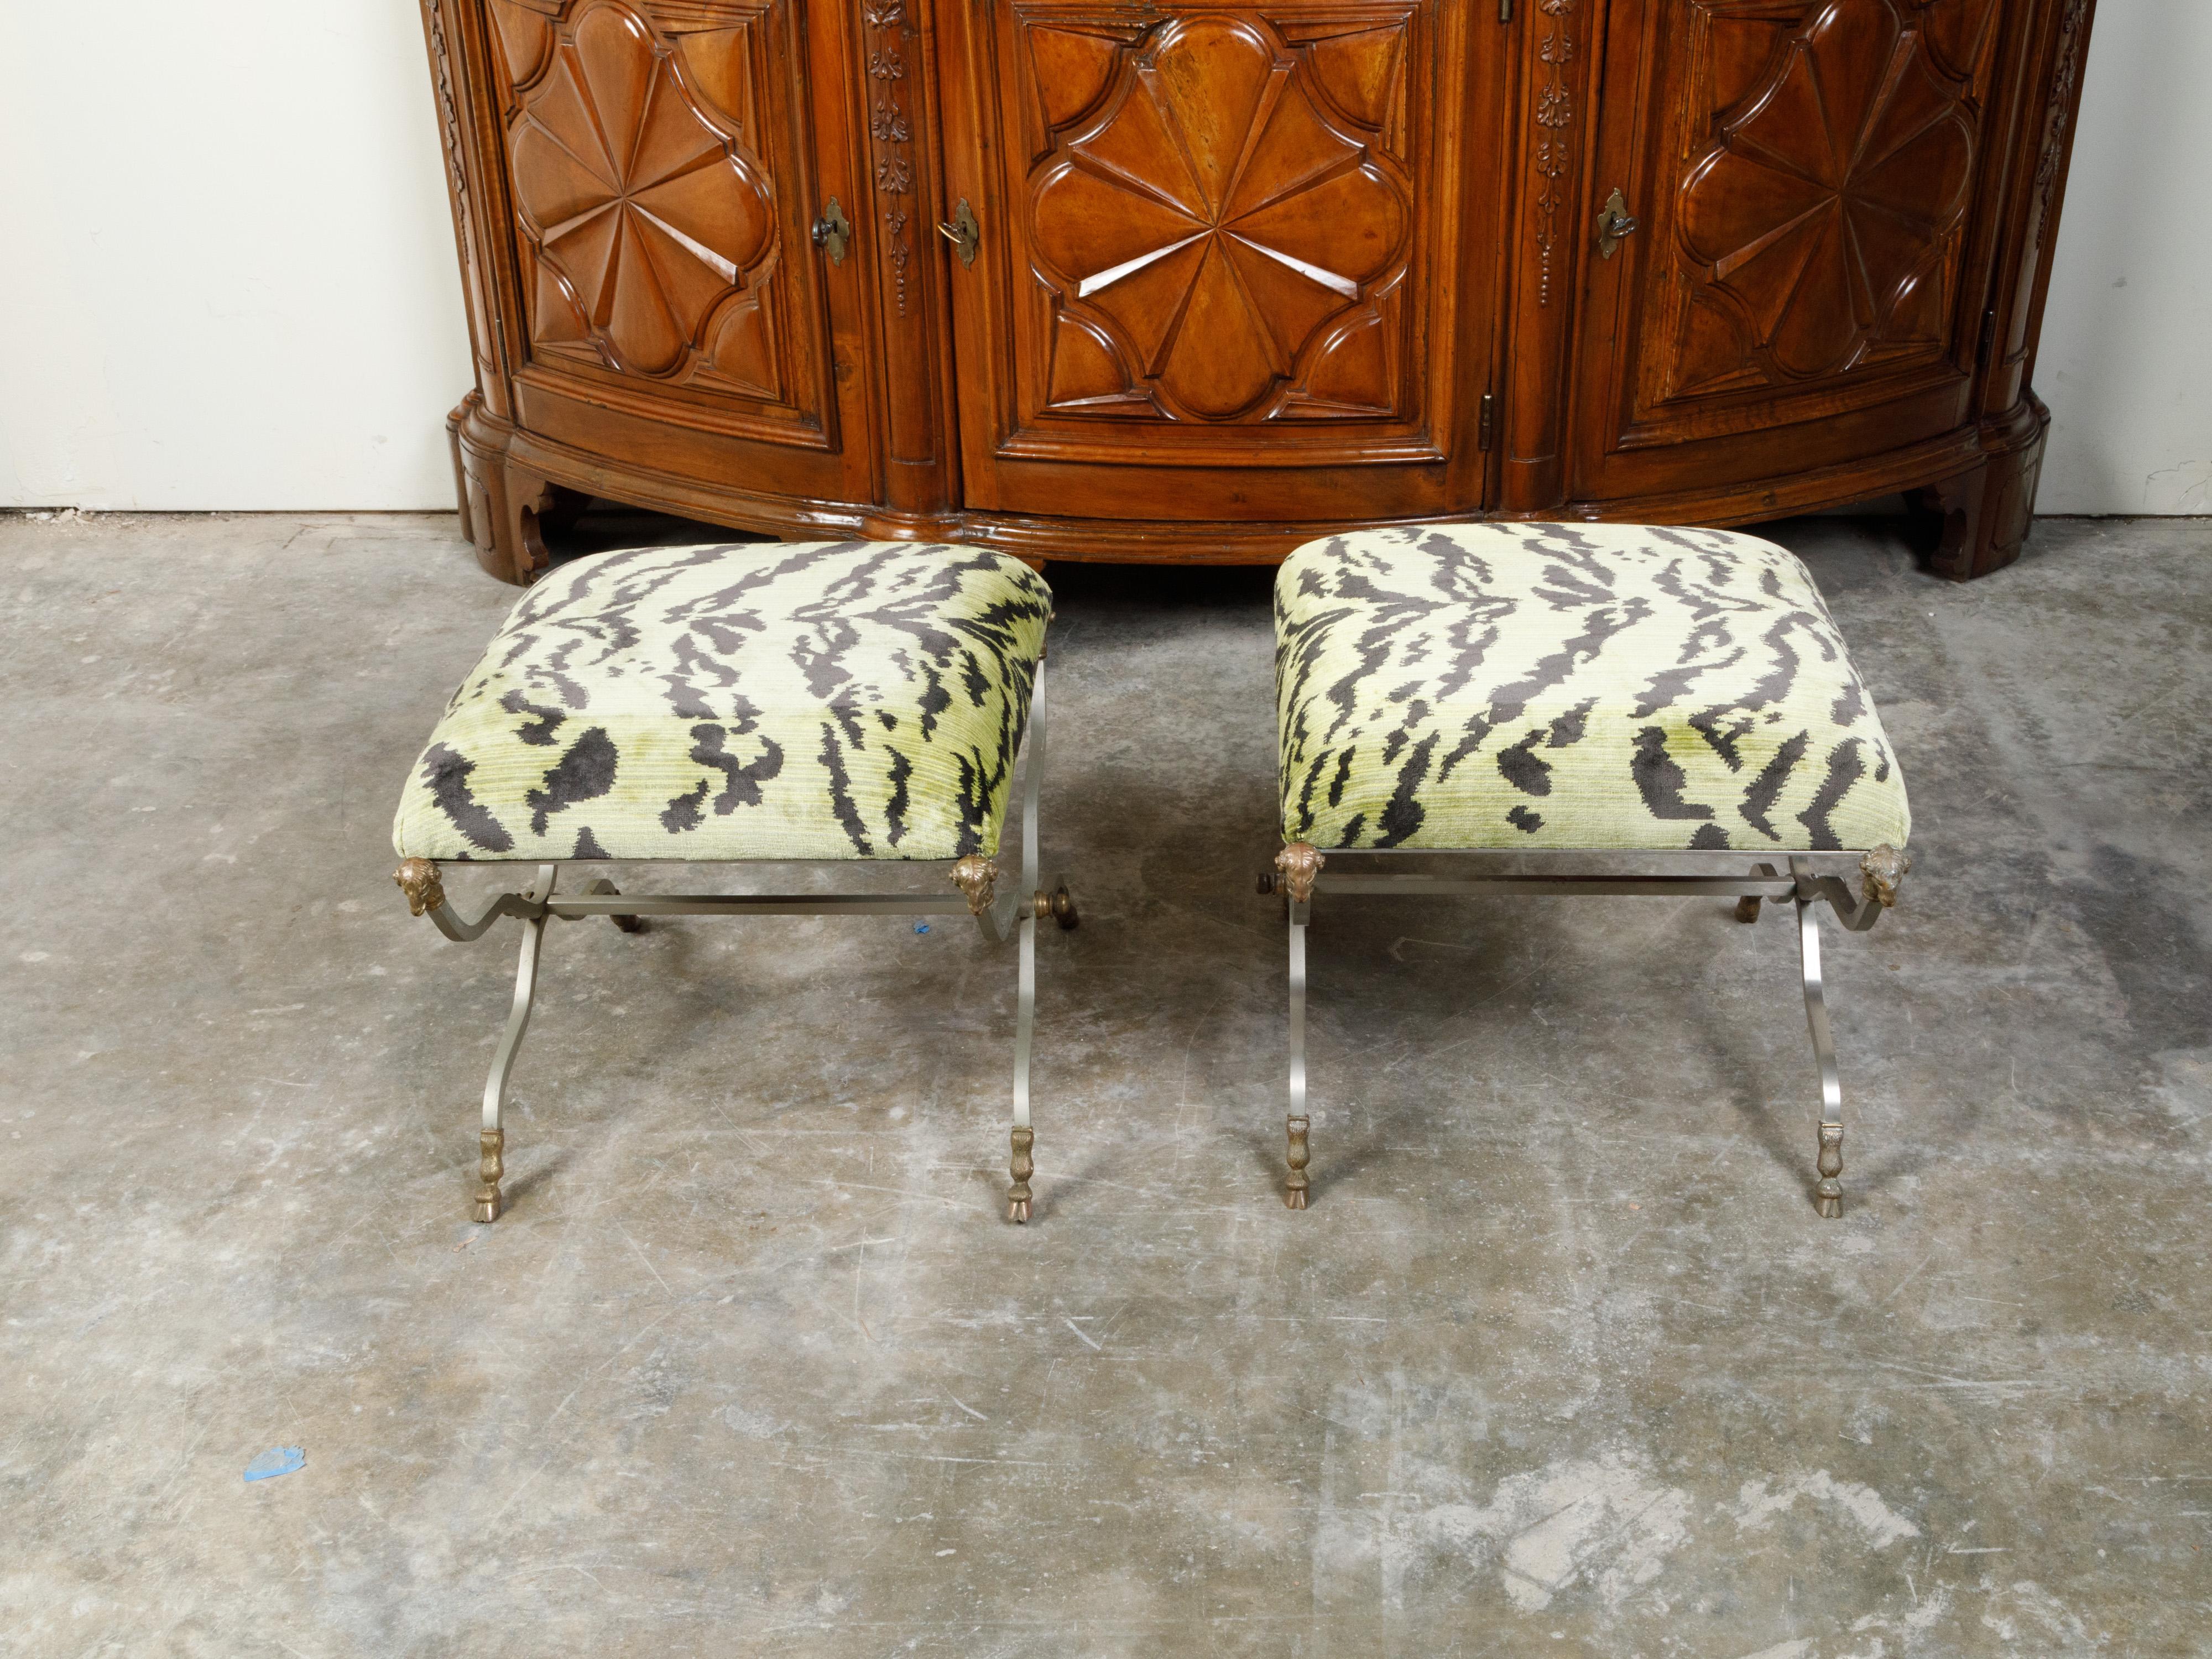 Maison Jansen Style Steel and Brass Stools with Rams' Heads and Hoof Feet For Sale 4